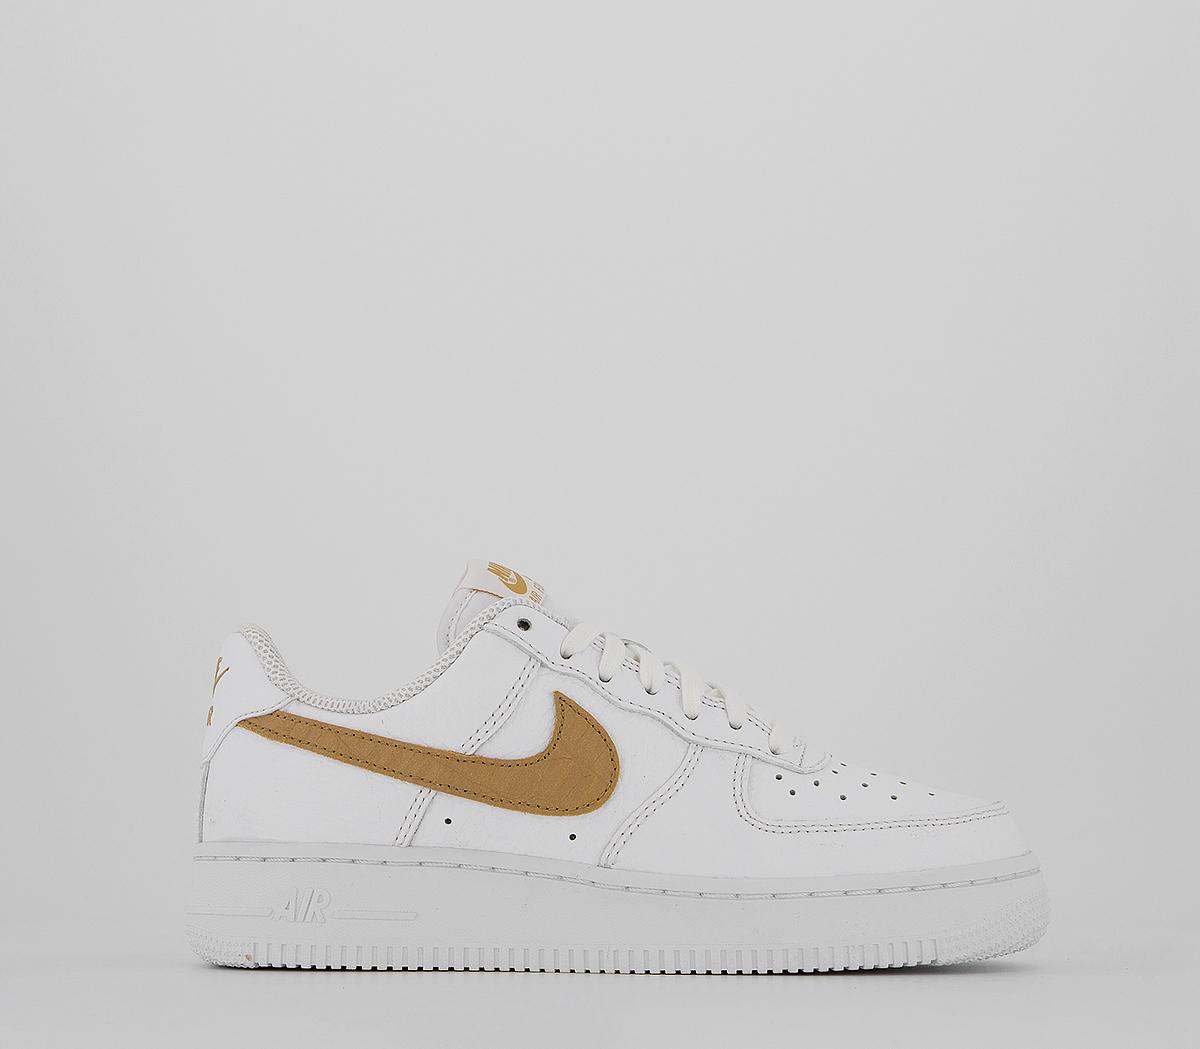 air force white and gold